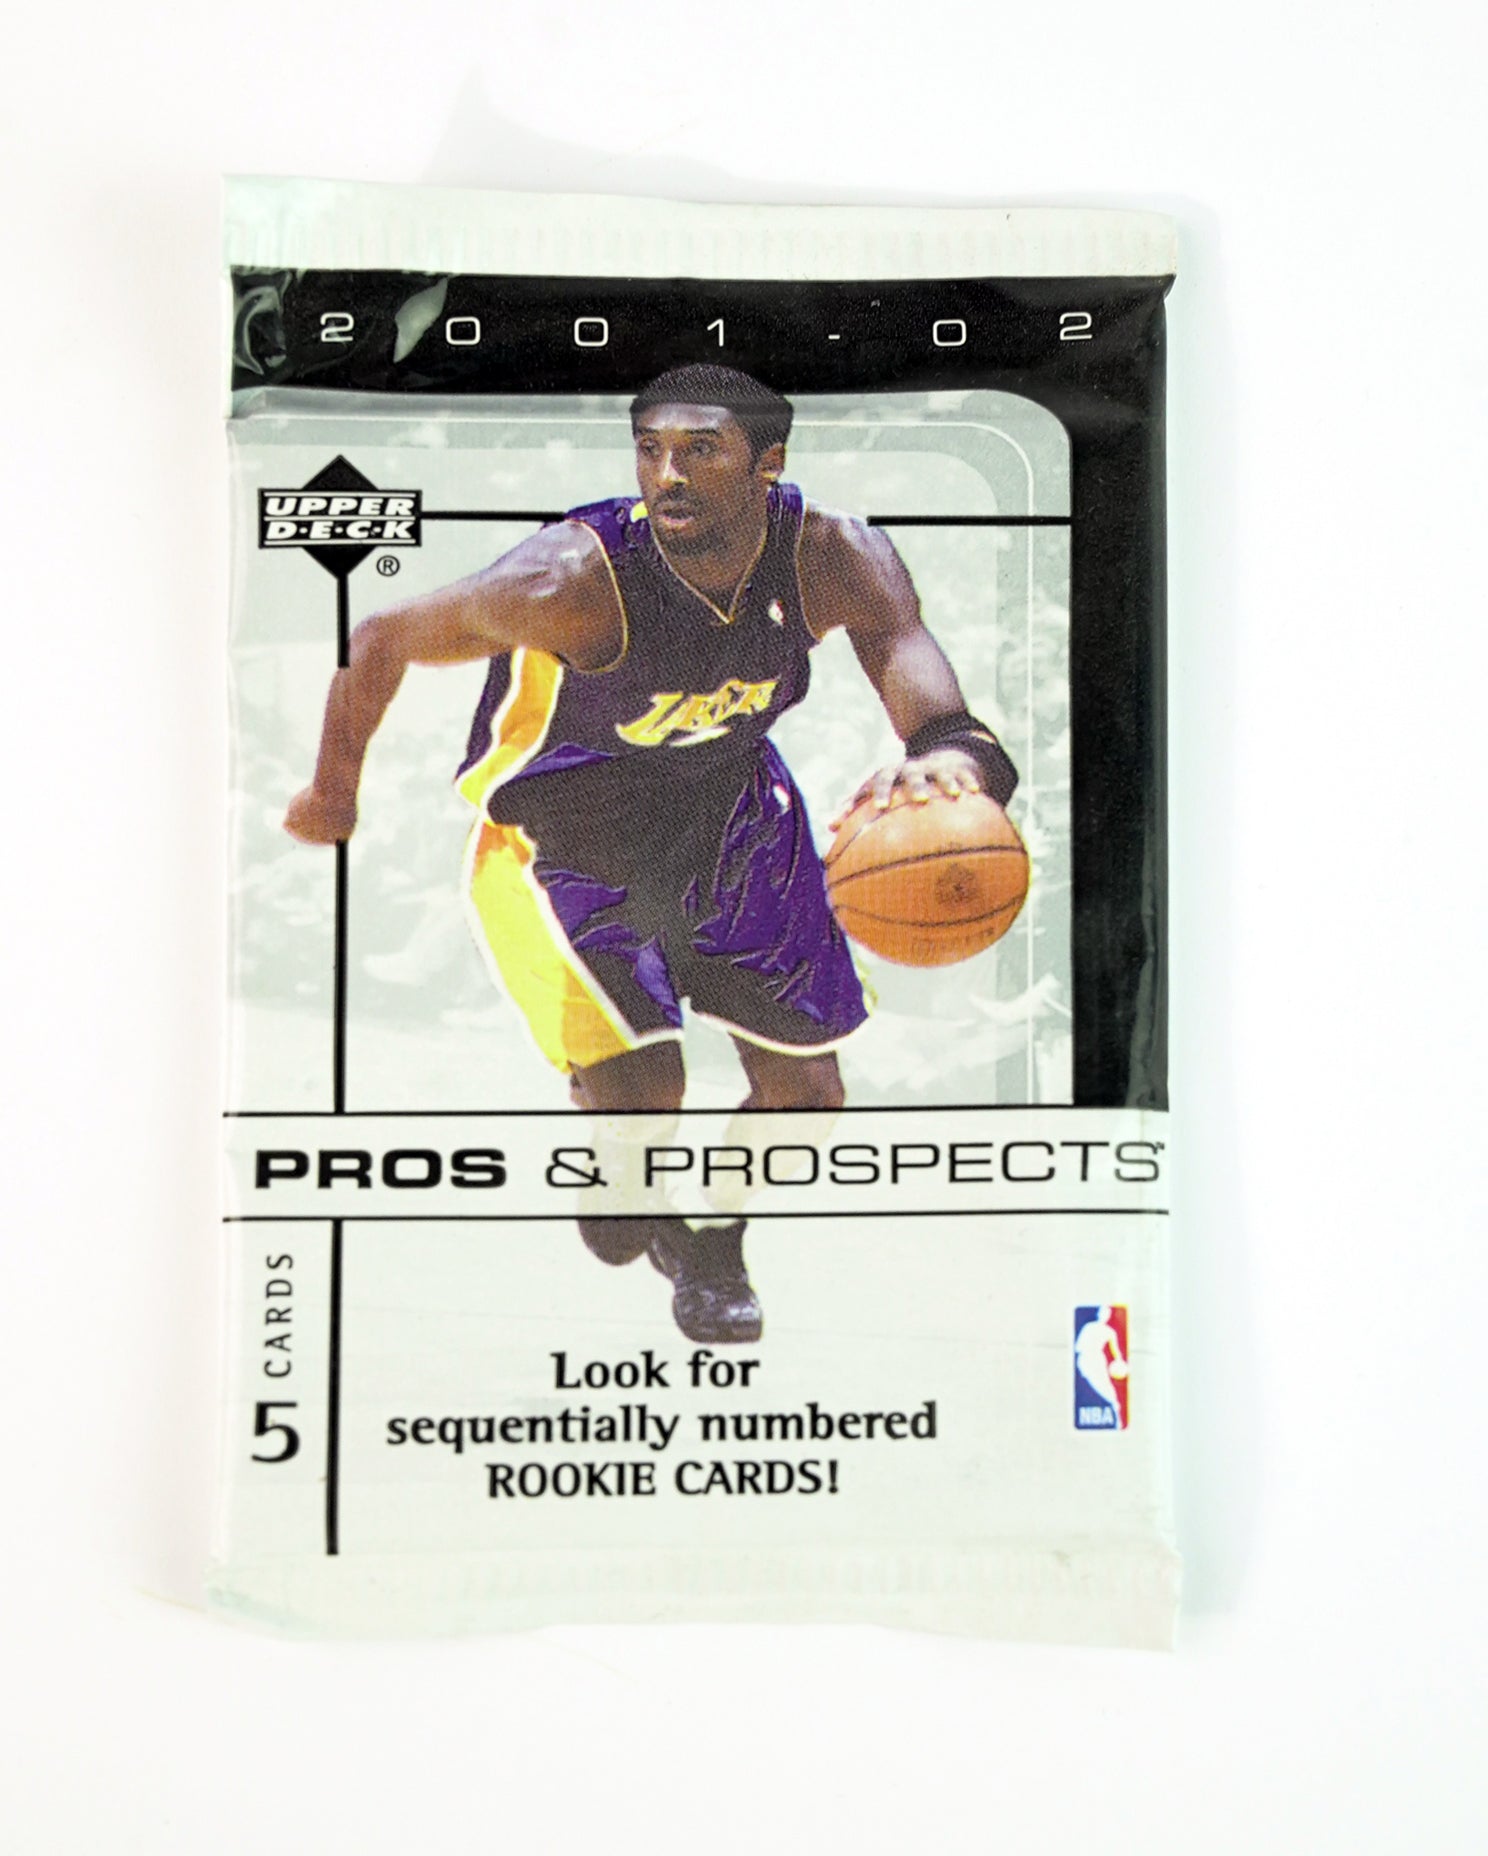 Unopened 2001-2002 Upper Deck Pros and Prospects  Basketball Card Pack